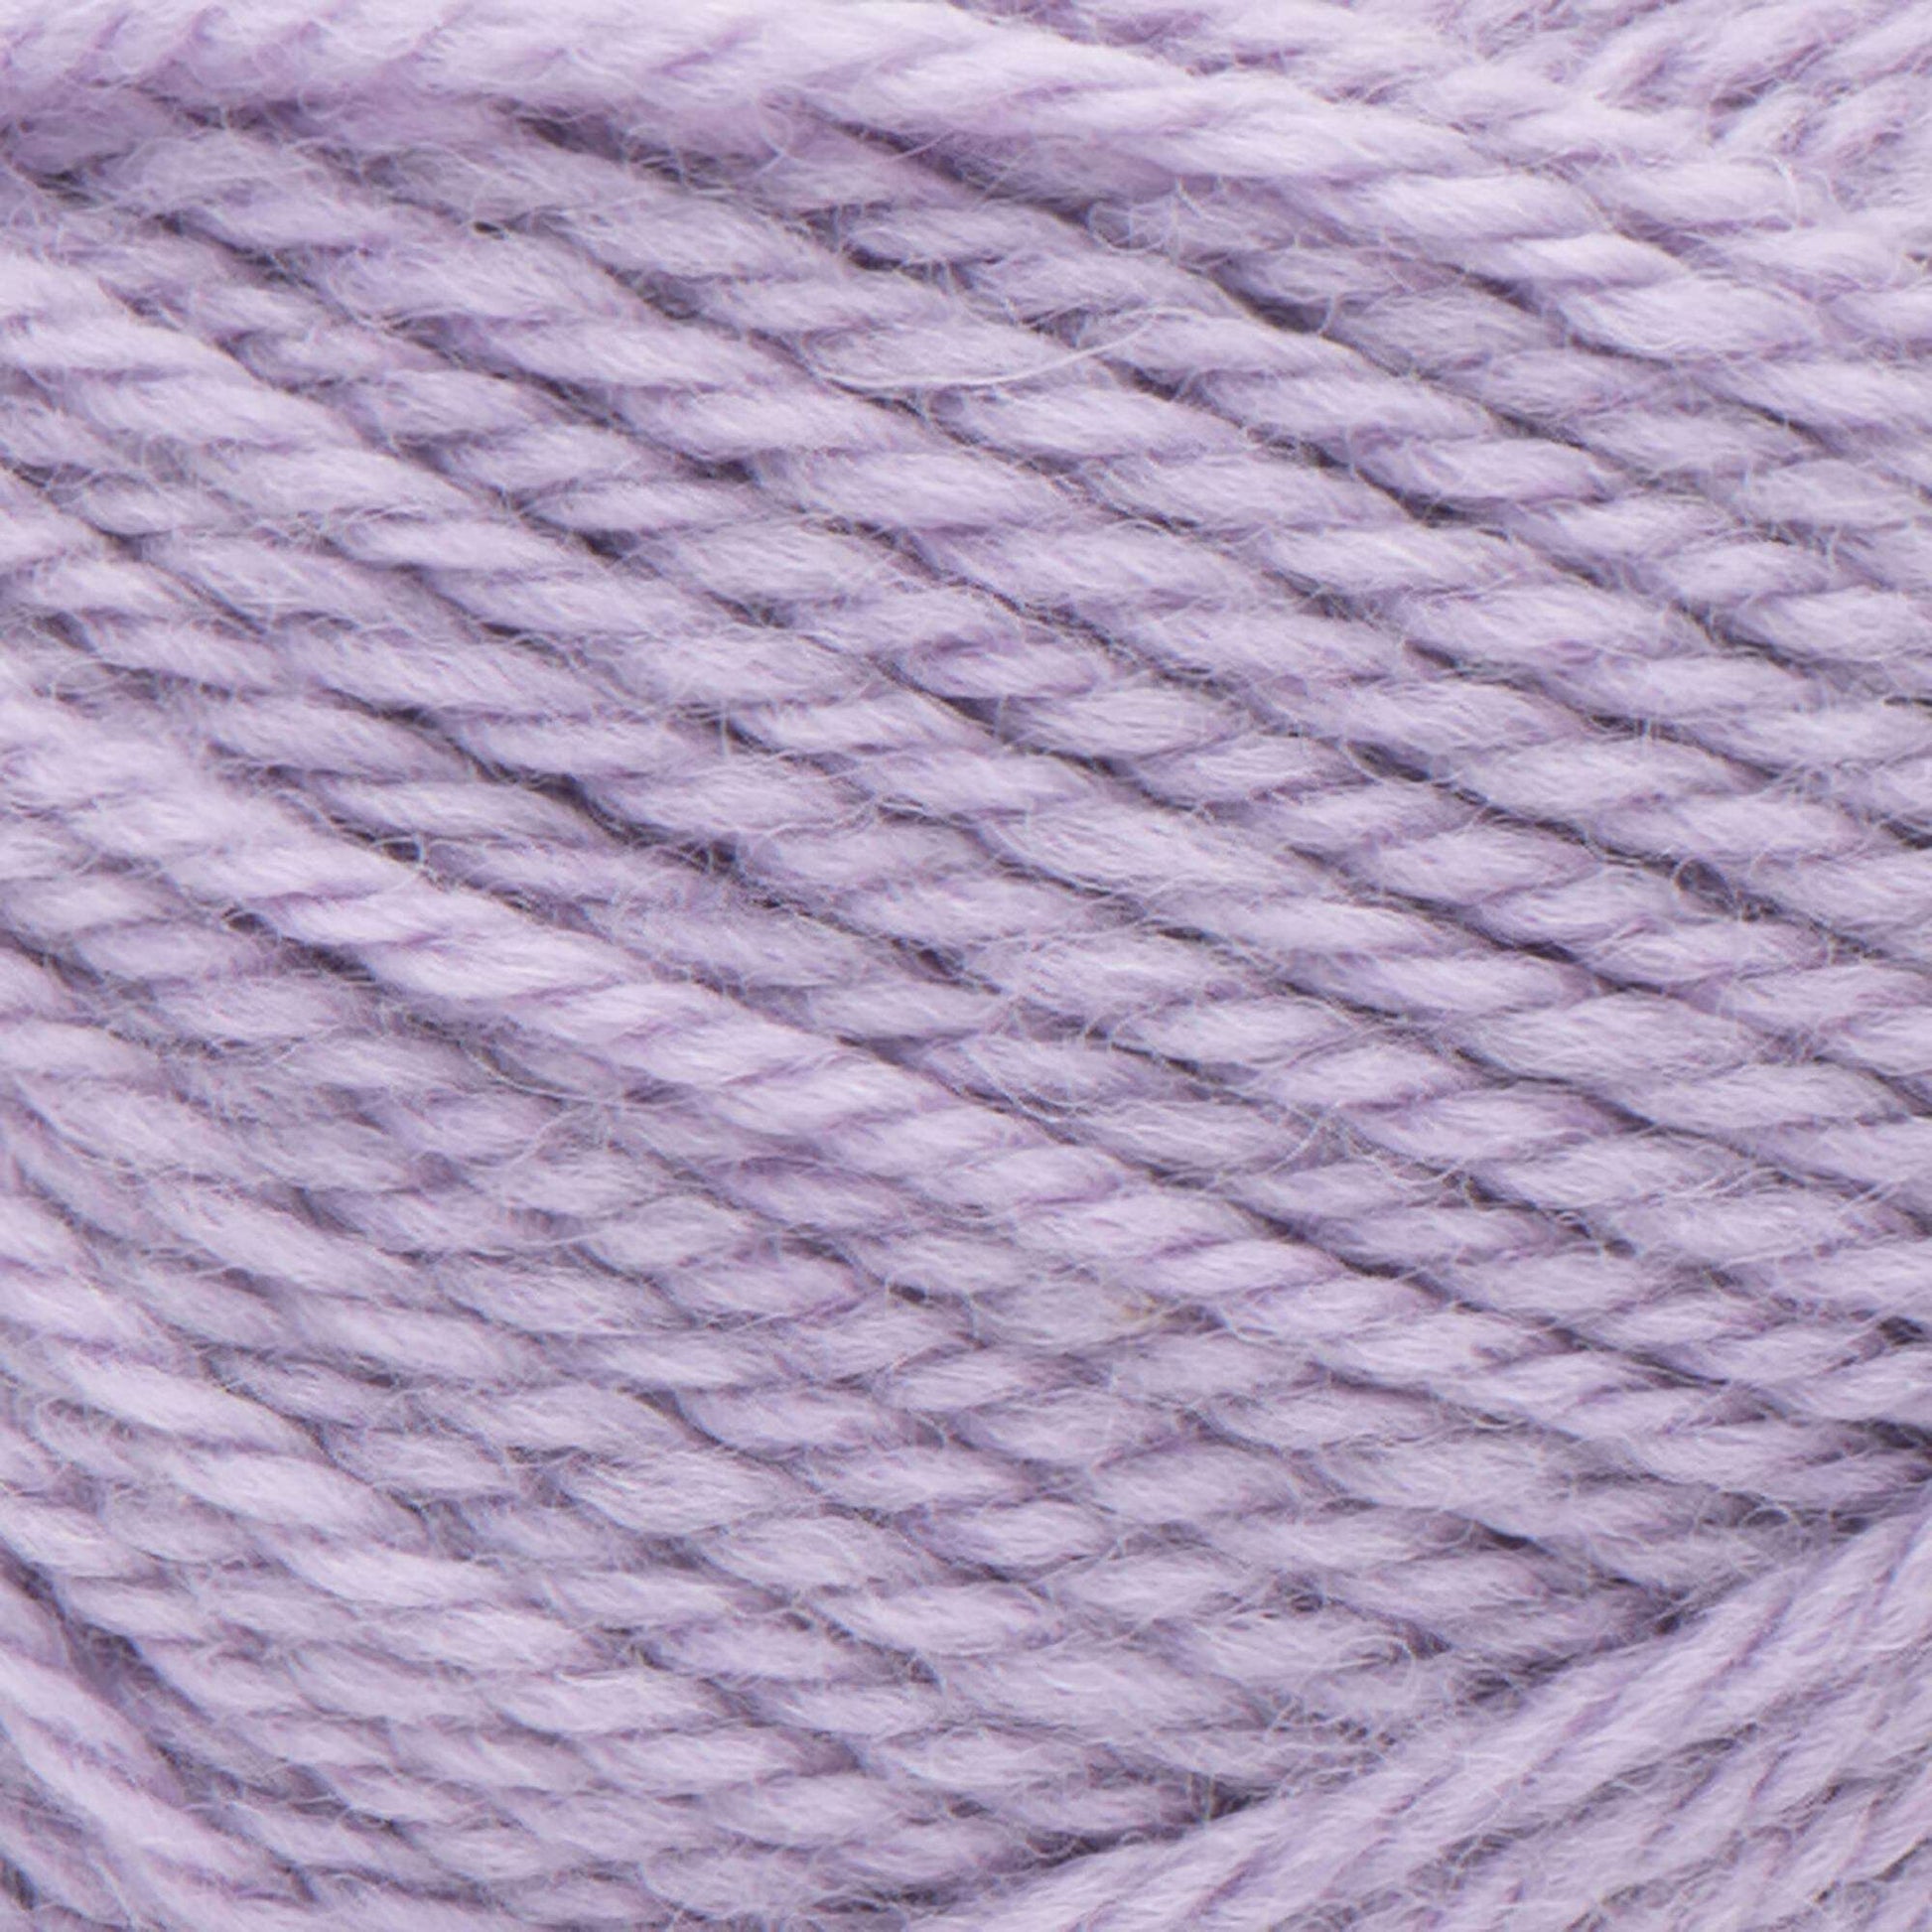 Patons Classic Wool Worsted Yarn Misty Lavender